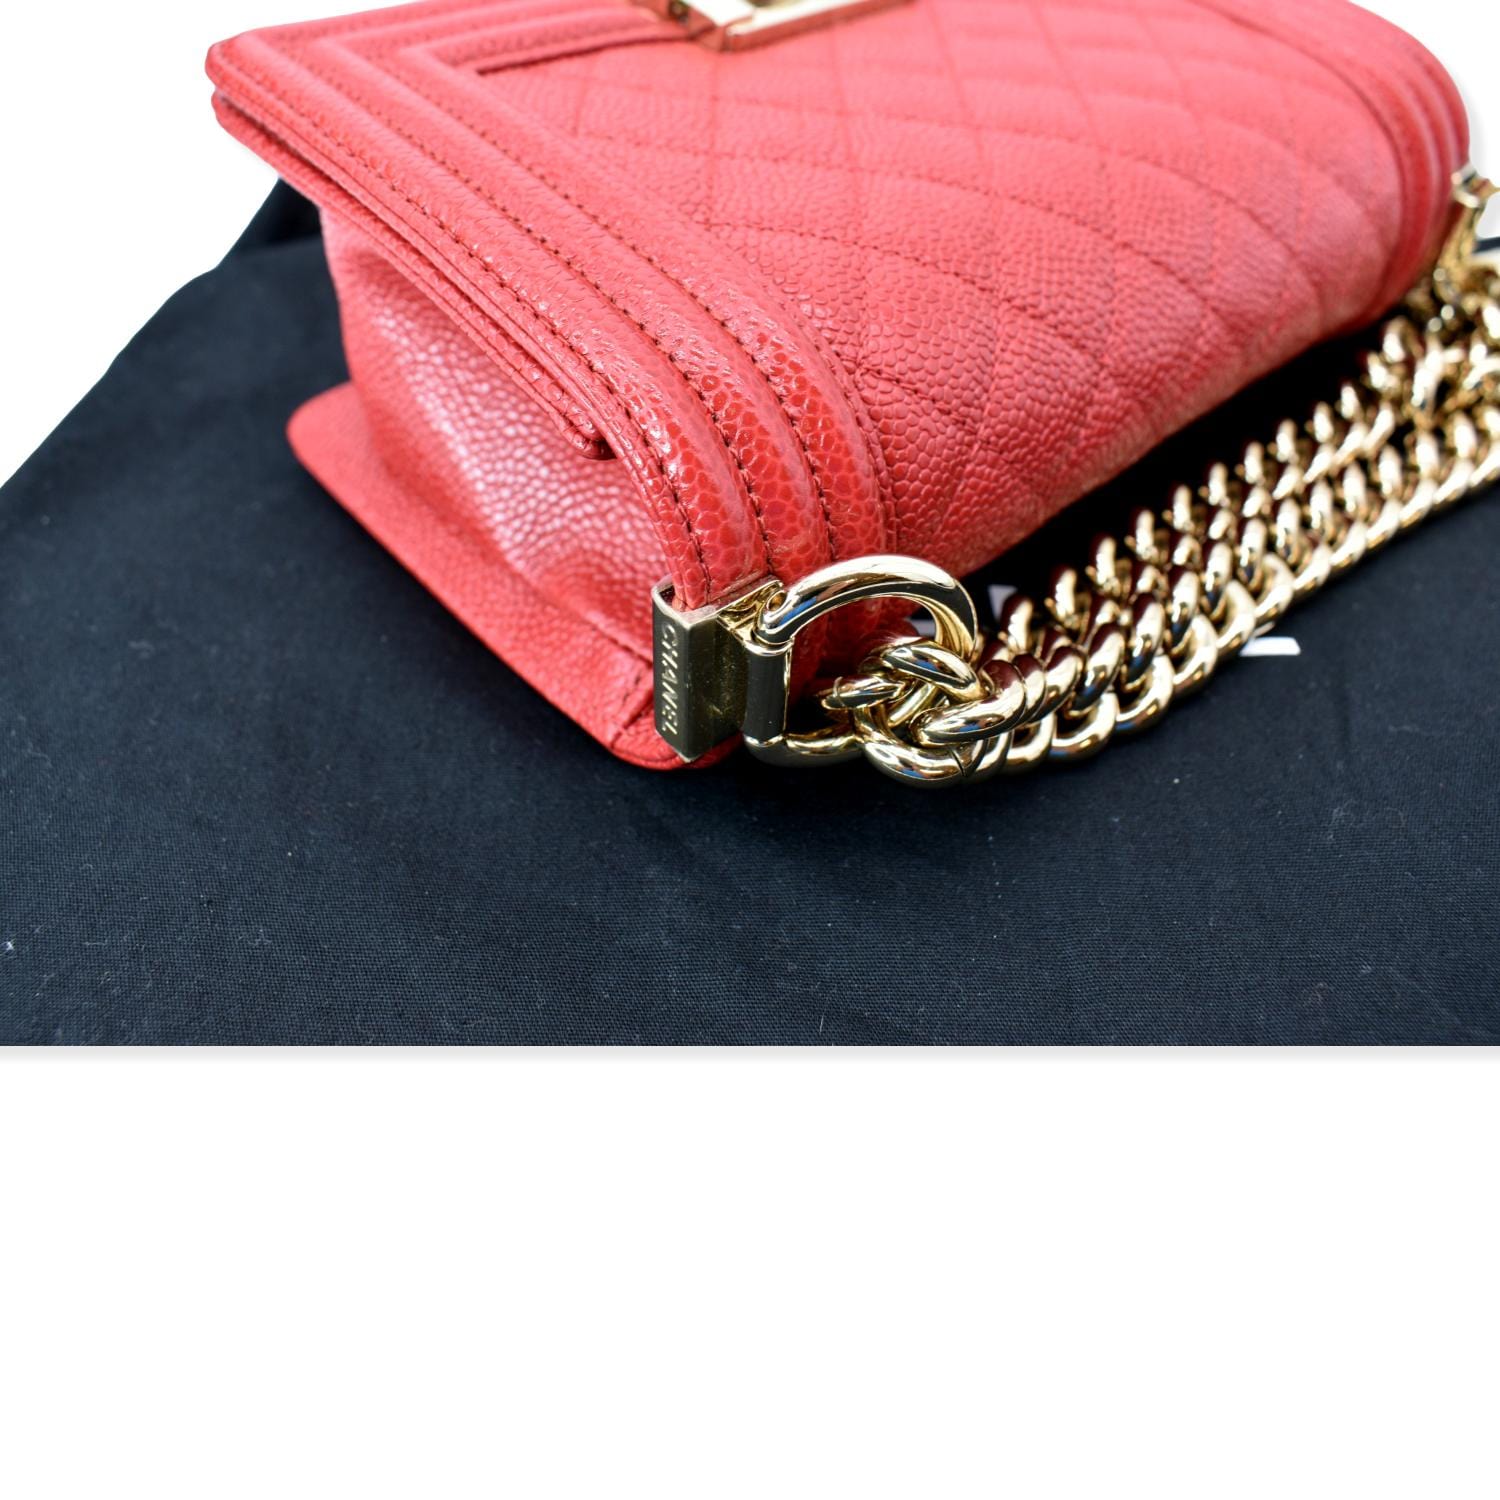 CHANEL Le Boy Small Caviar Leather Shoulder Bag Red